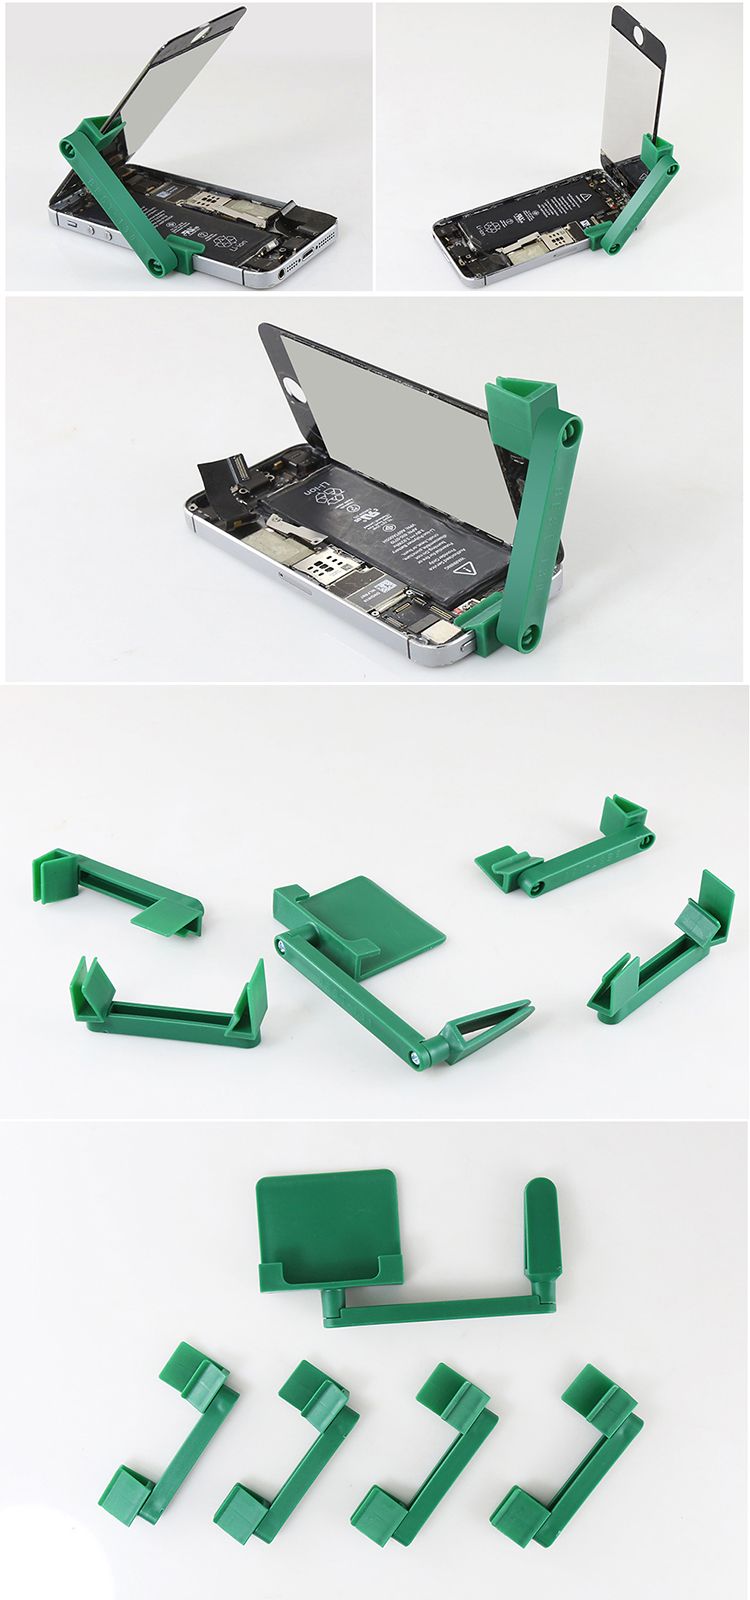 BEST-BST-130-Mobile-Phones-Plate-Repair-Motherboard-PCB-Fixed-Bracket-Maintenance-Support-Multifunct-1352880